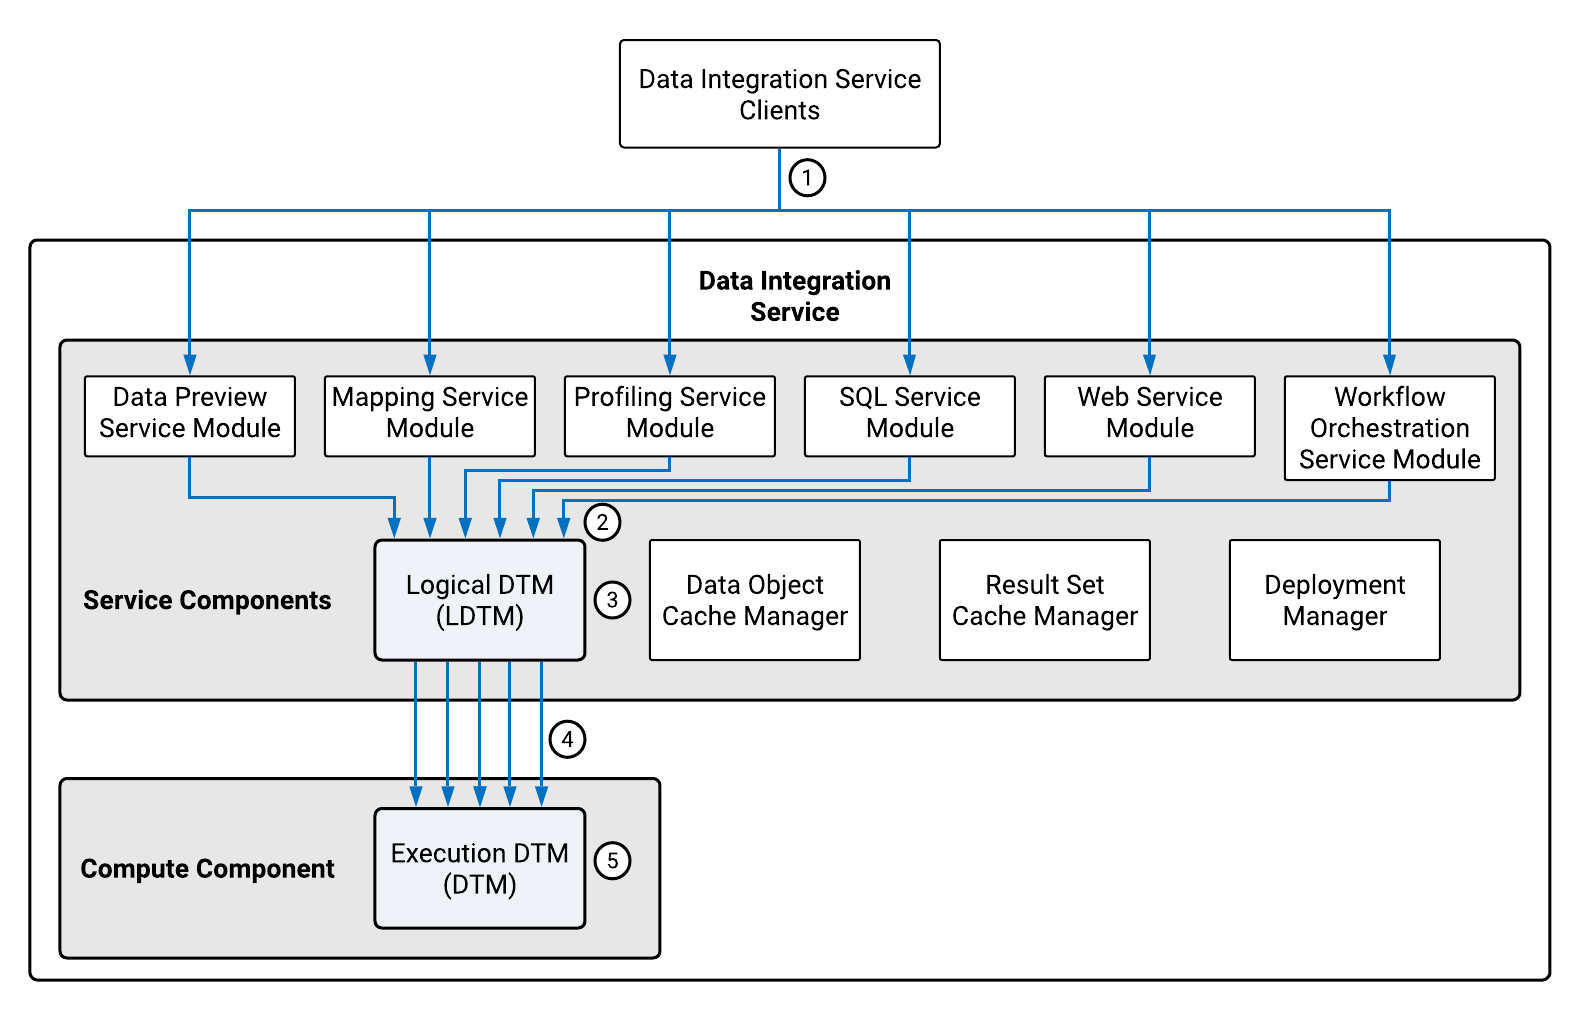 The Data Integration Service service components include the Mapping Service Module, Profiling Service Module, SQL Service Module, Web Service Module, Workflow Service Module, Data Object Cache Manager, Result Set Cache Manager, Deployment Manager, and logical Data Transformation Manager (LDTM). The Data Integration Service compute component inclues the execution Data Transformation Manager (DTM). 
		  